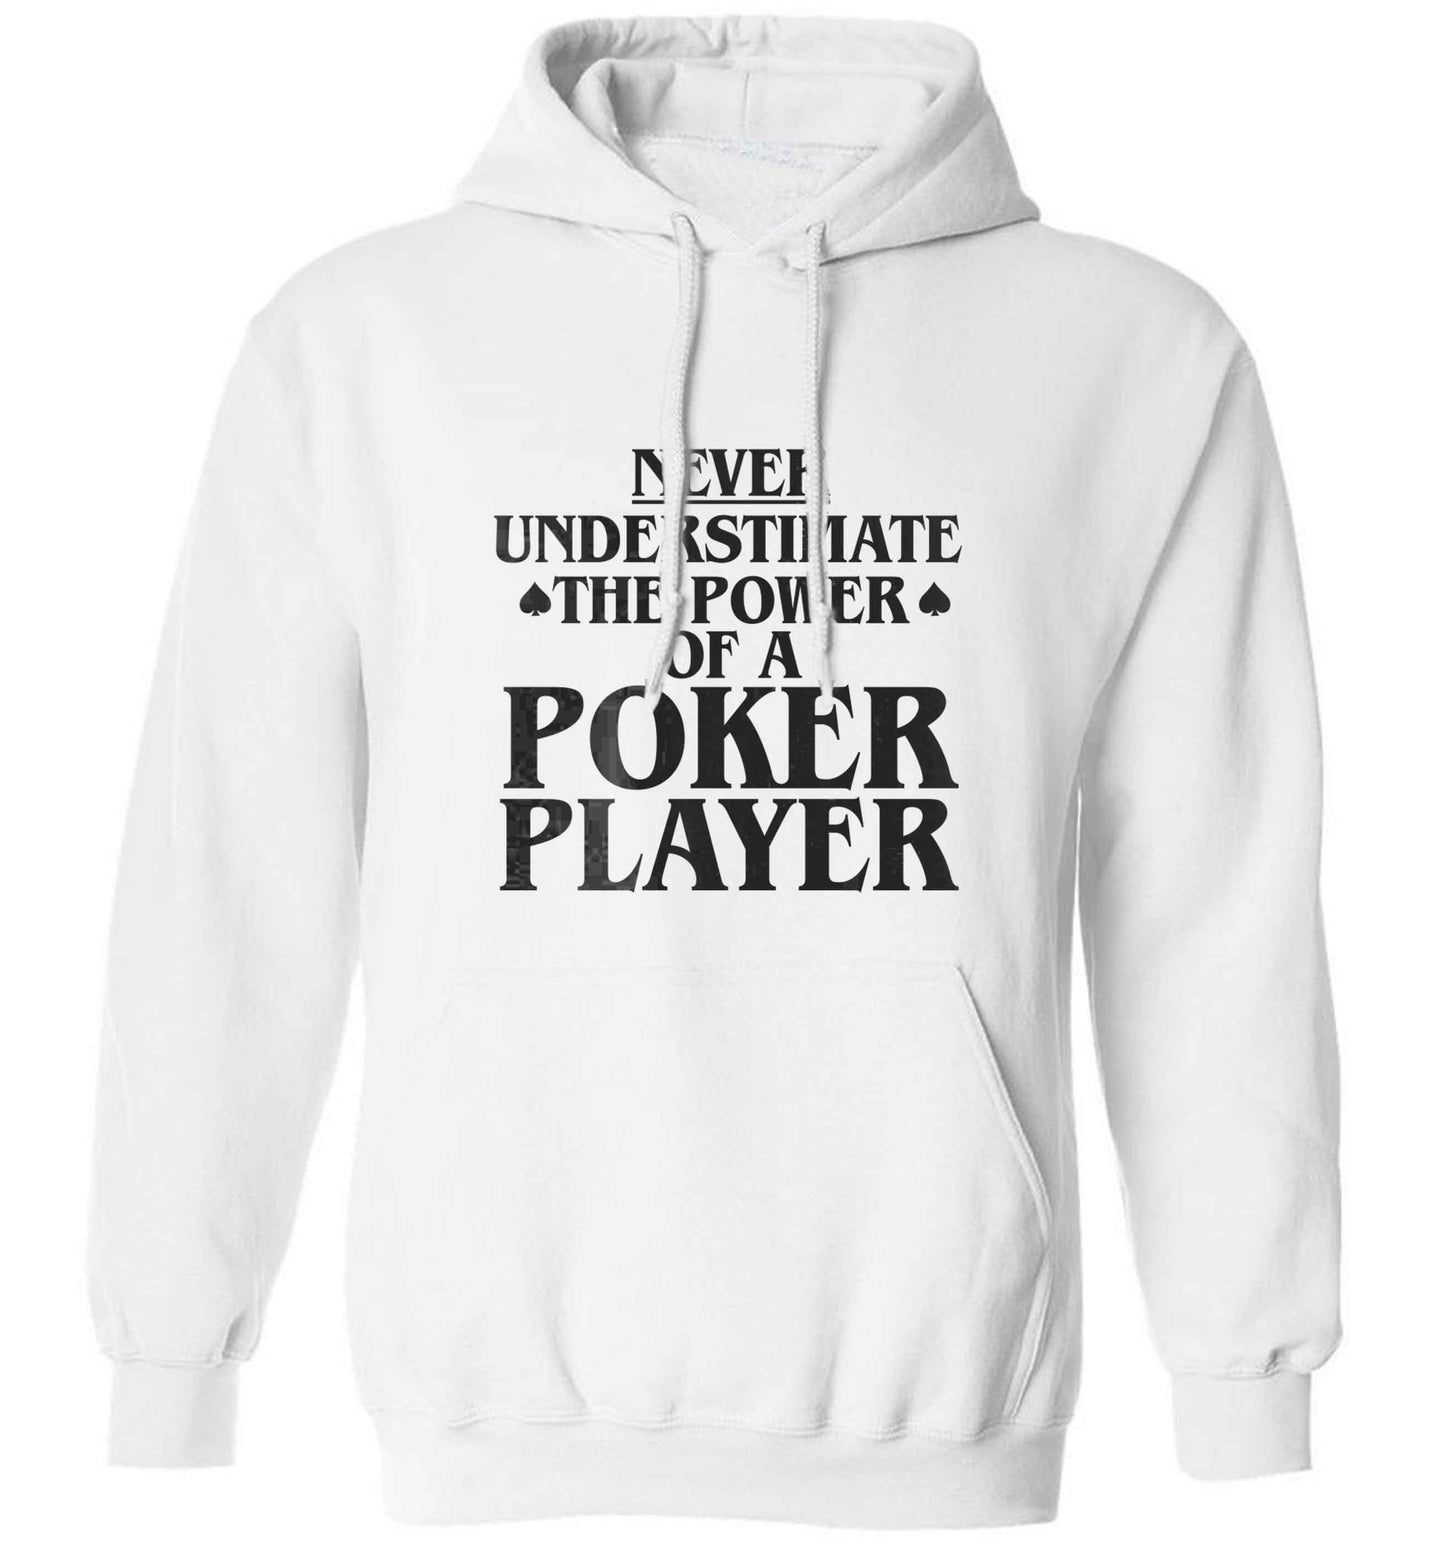 Never understimate the power of a poker player adults unisex white hoodie 2XL